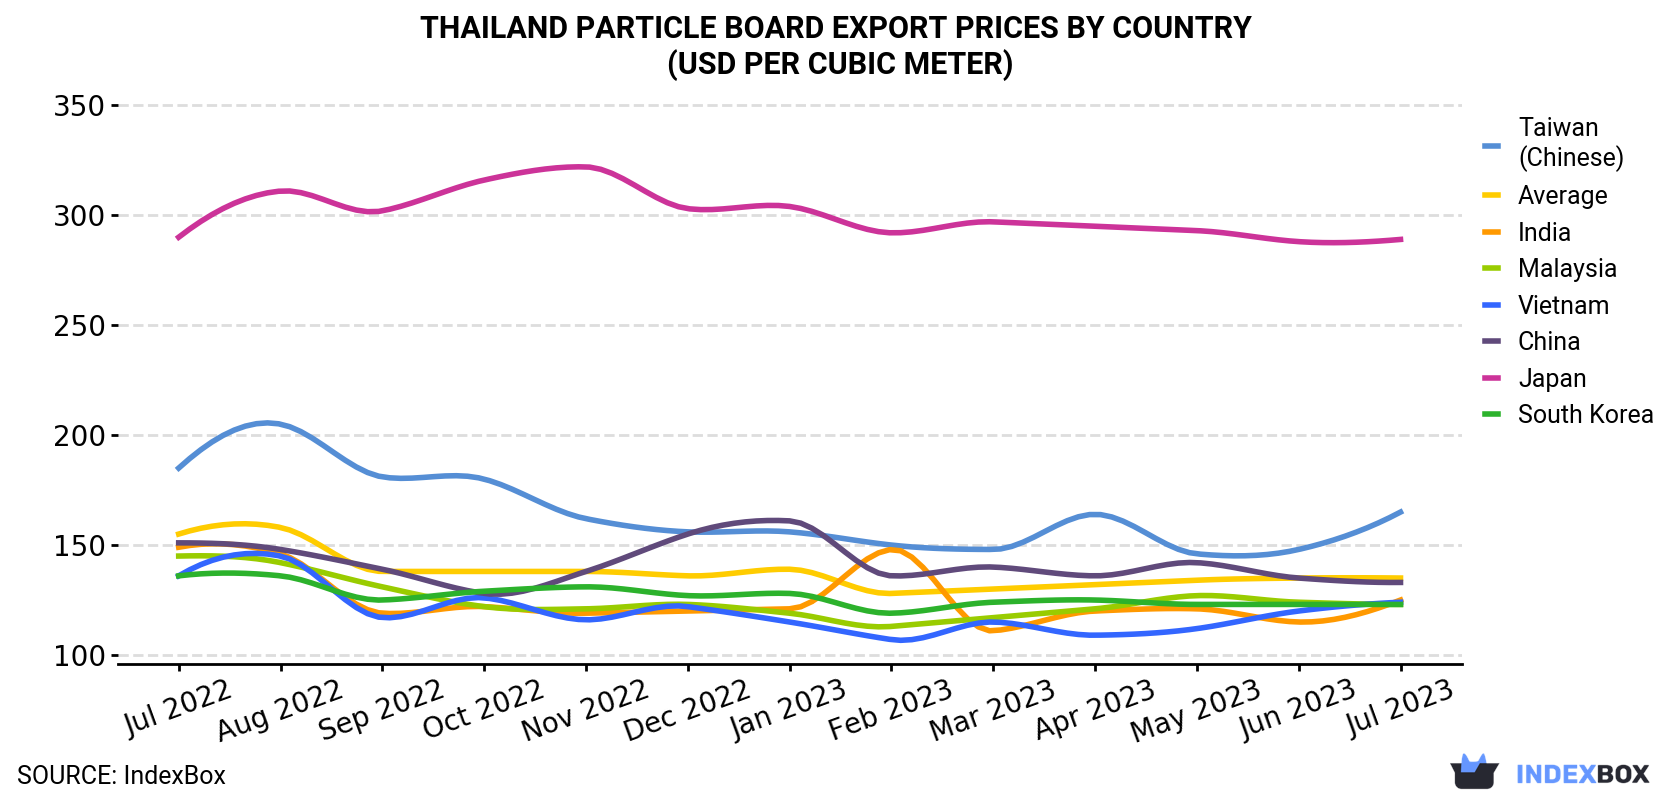 Thailand Particle Board Export Prices By Country (USD Per Cubic Meter)